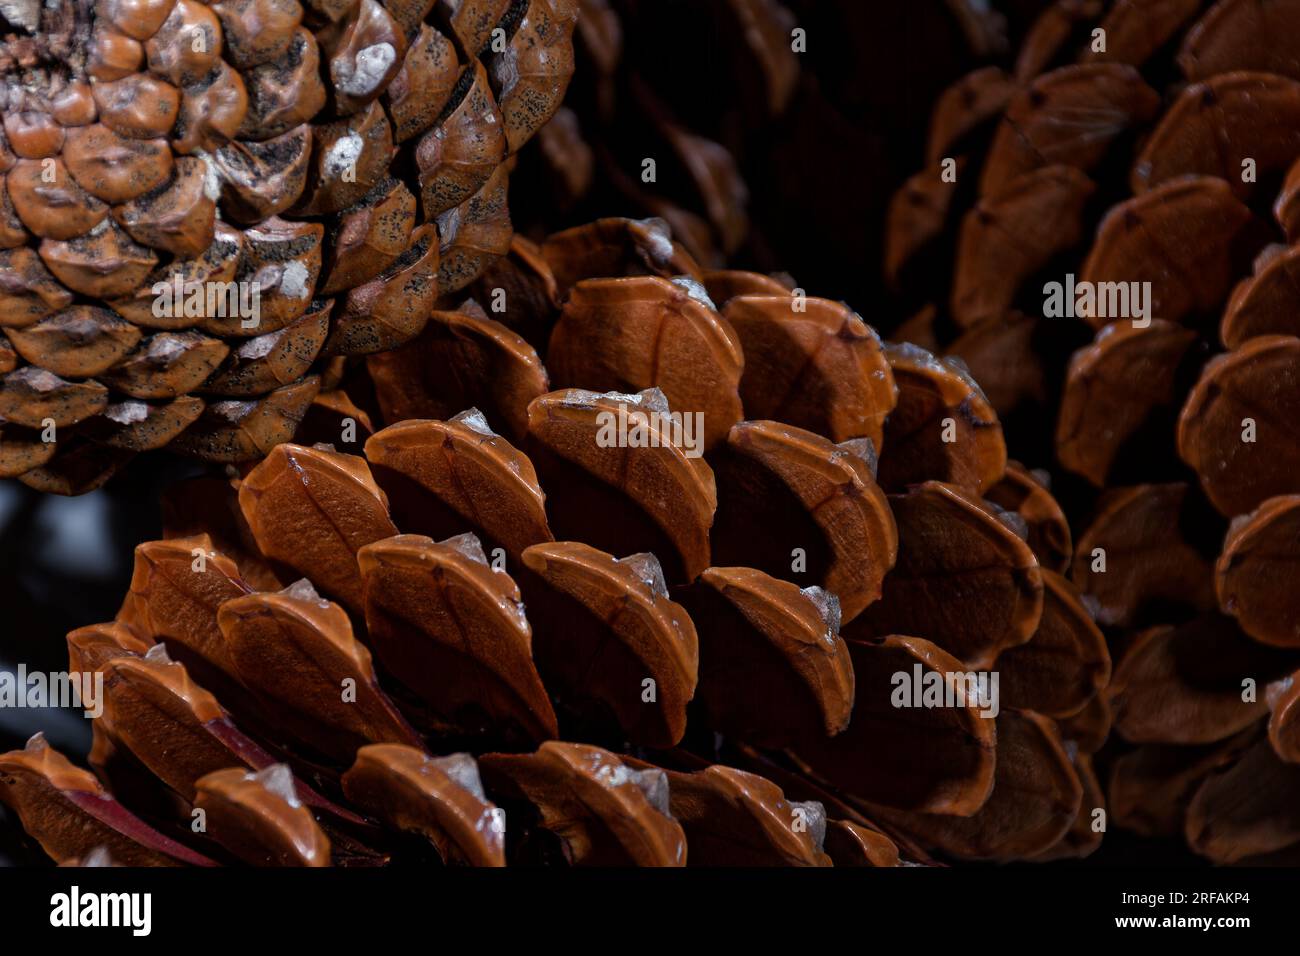 biological example of fibonacci spirals seen at a pine cone with opened leafs Stock Photo